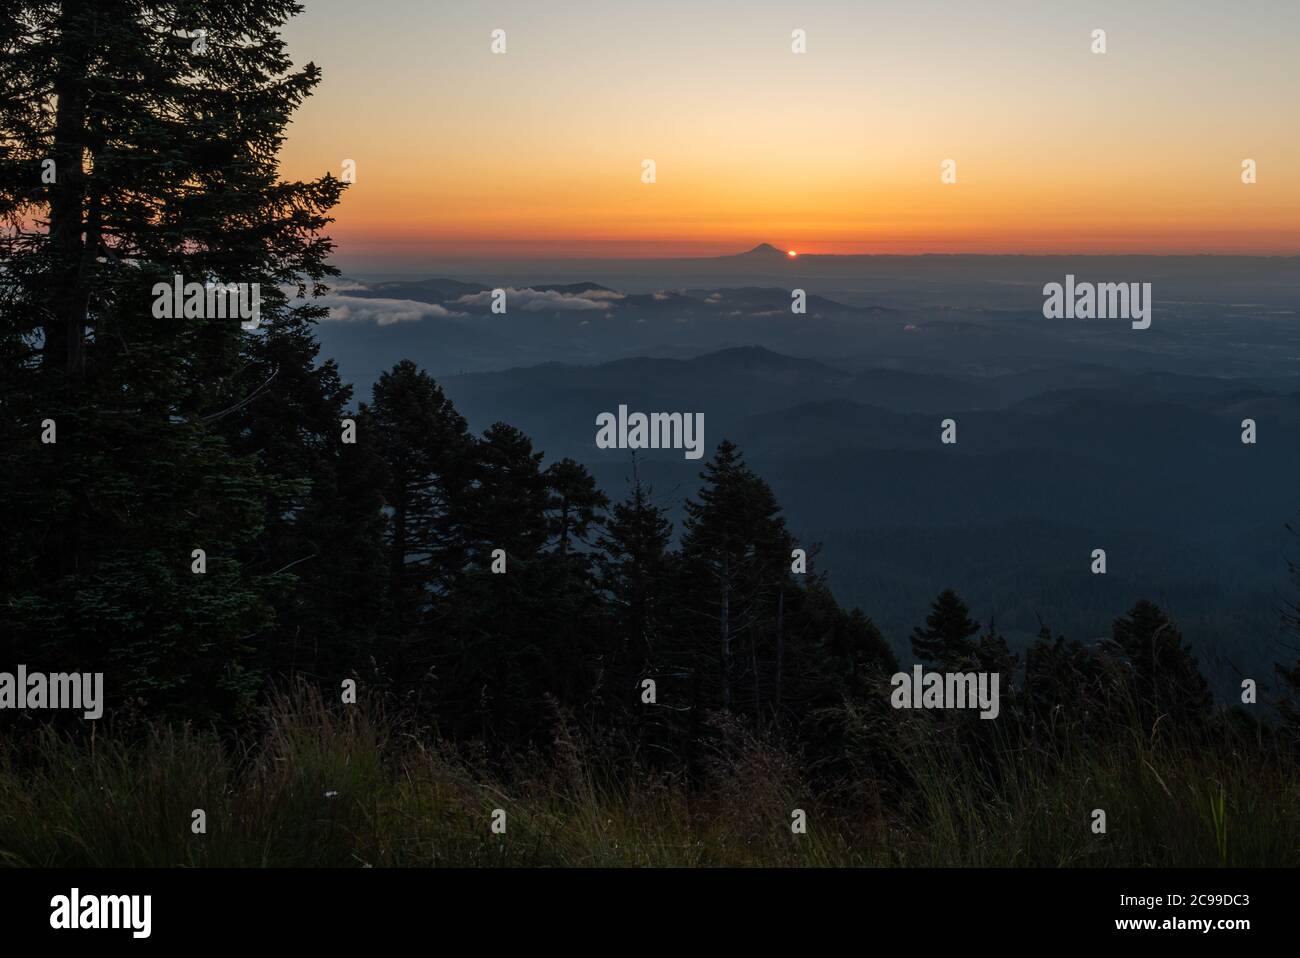 Sunrise just peaking over the southern flank of Mount Hood, with forest and the Willamette Valley in the foreground. Stock Photo